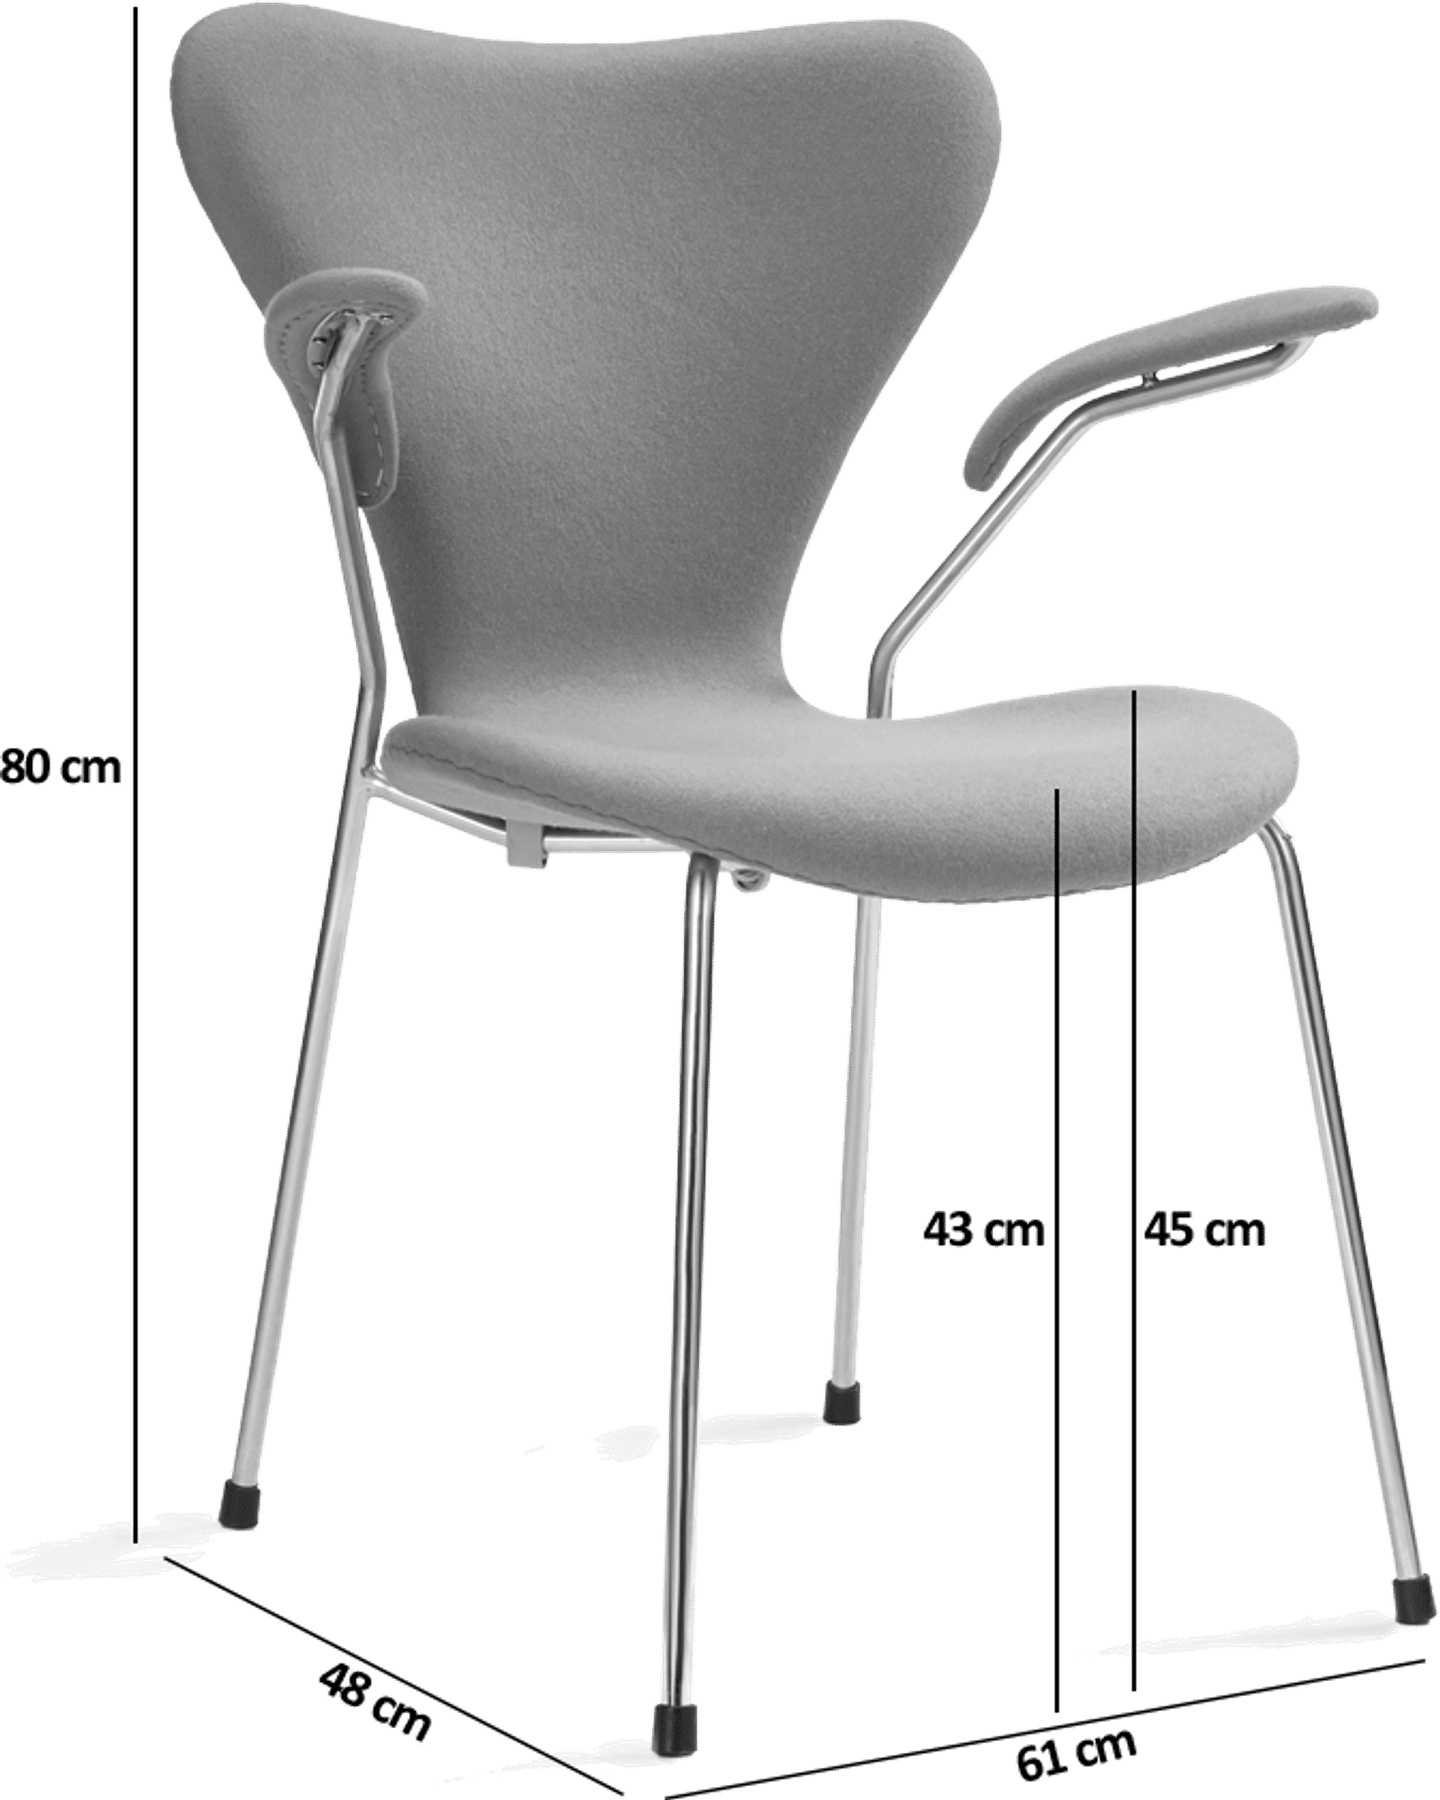 Serie 7 Chair Carver Green image.